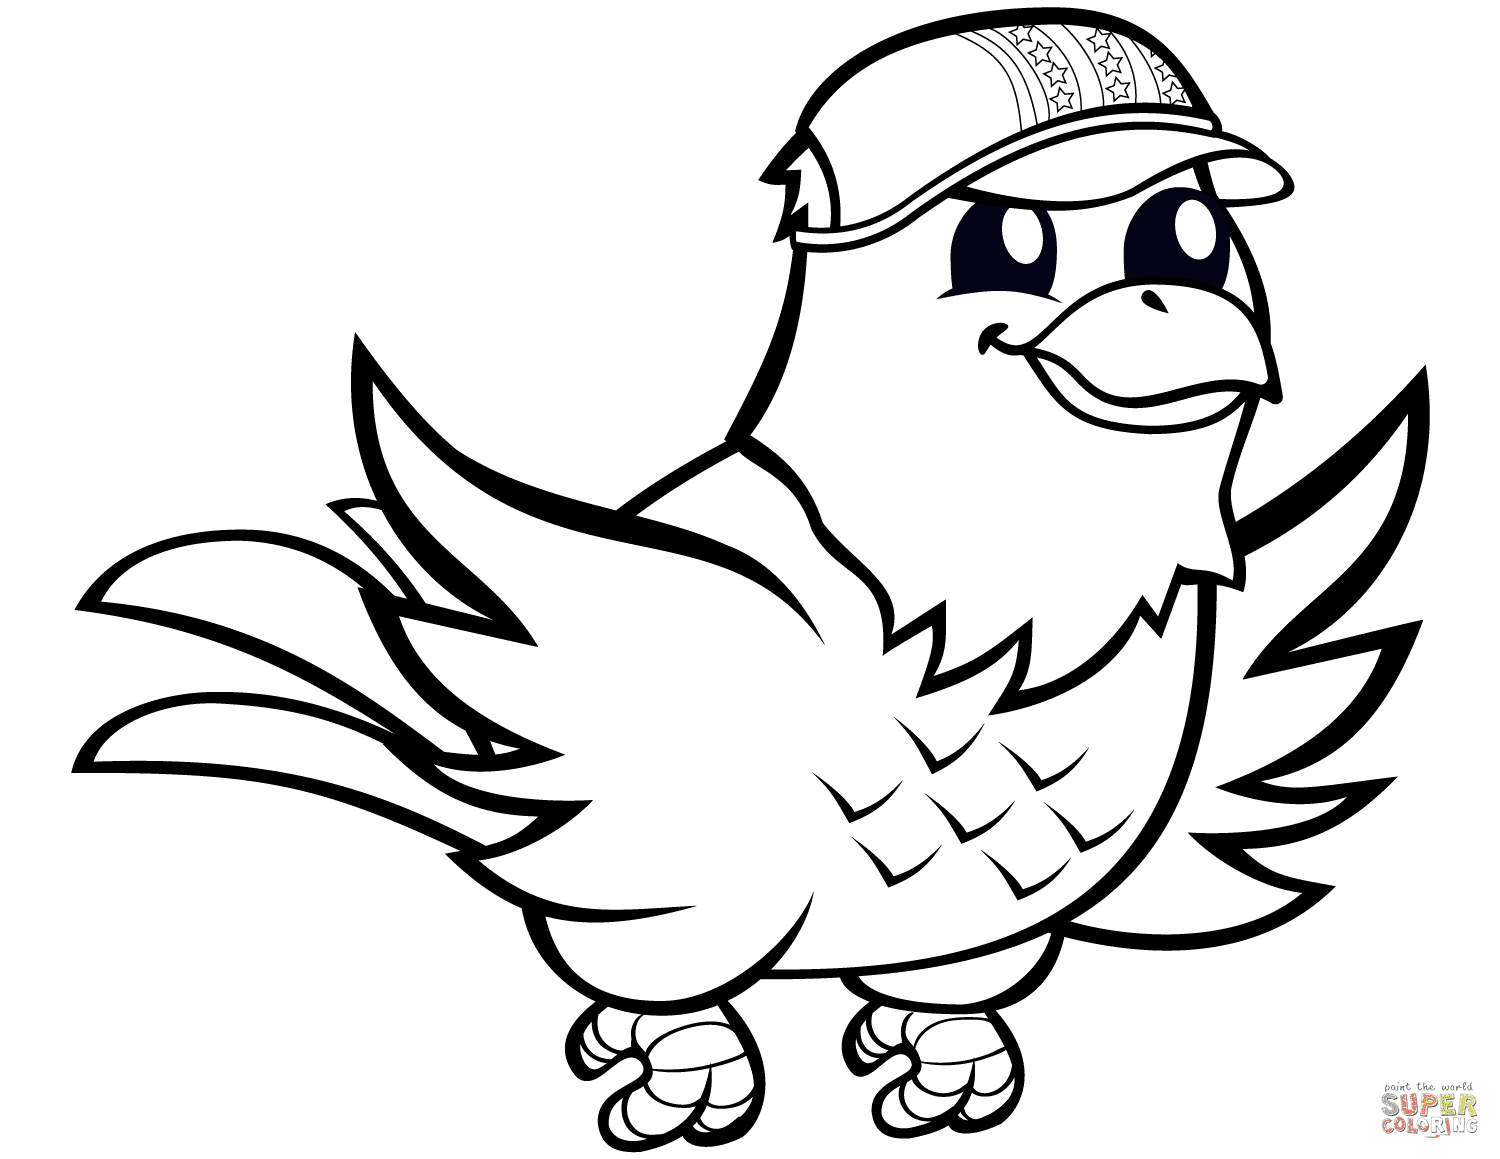 Funny Eagle with Baseball Cap Coloring Pages